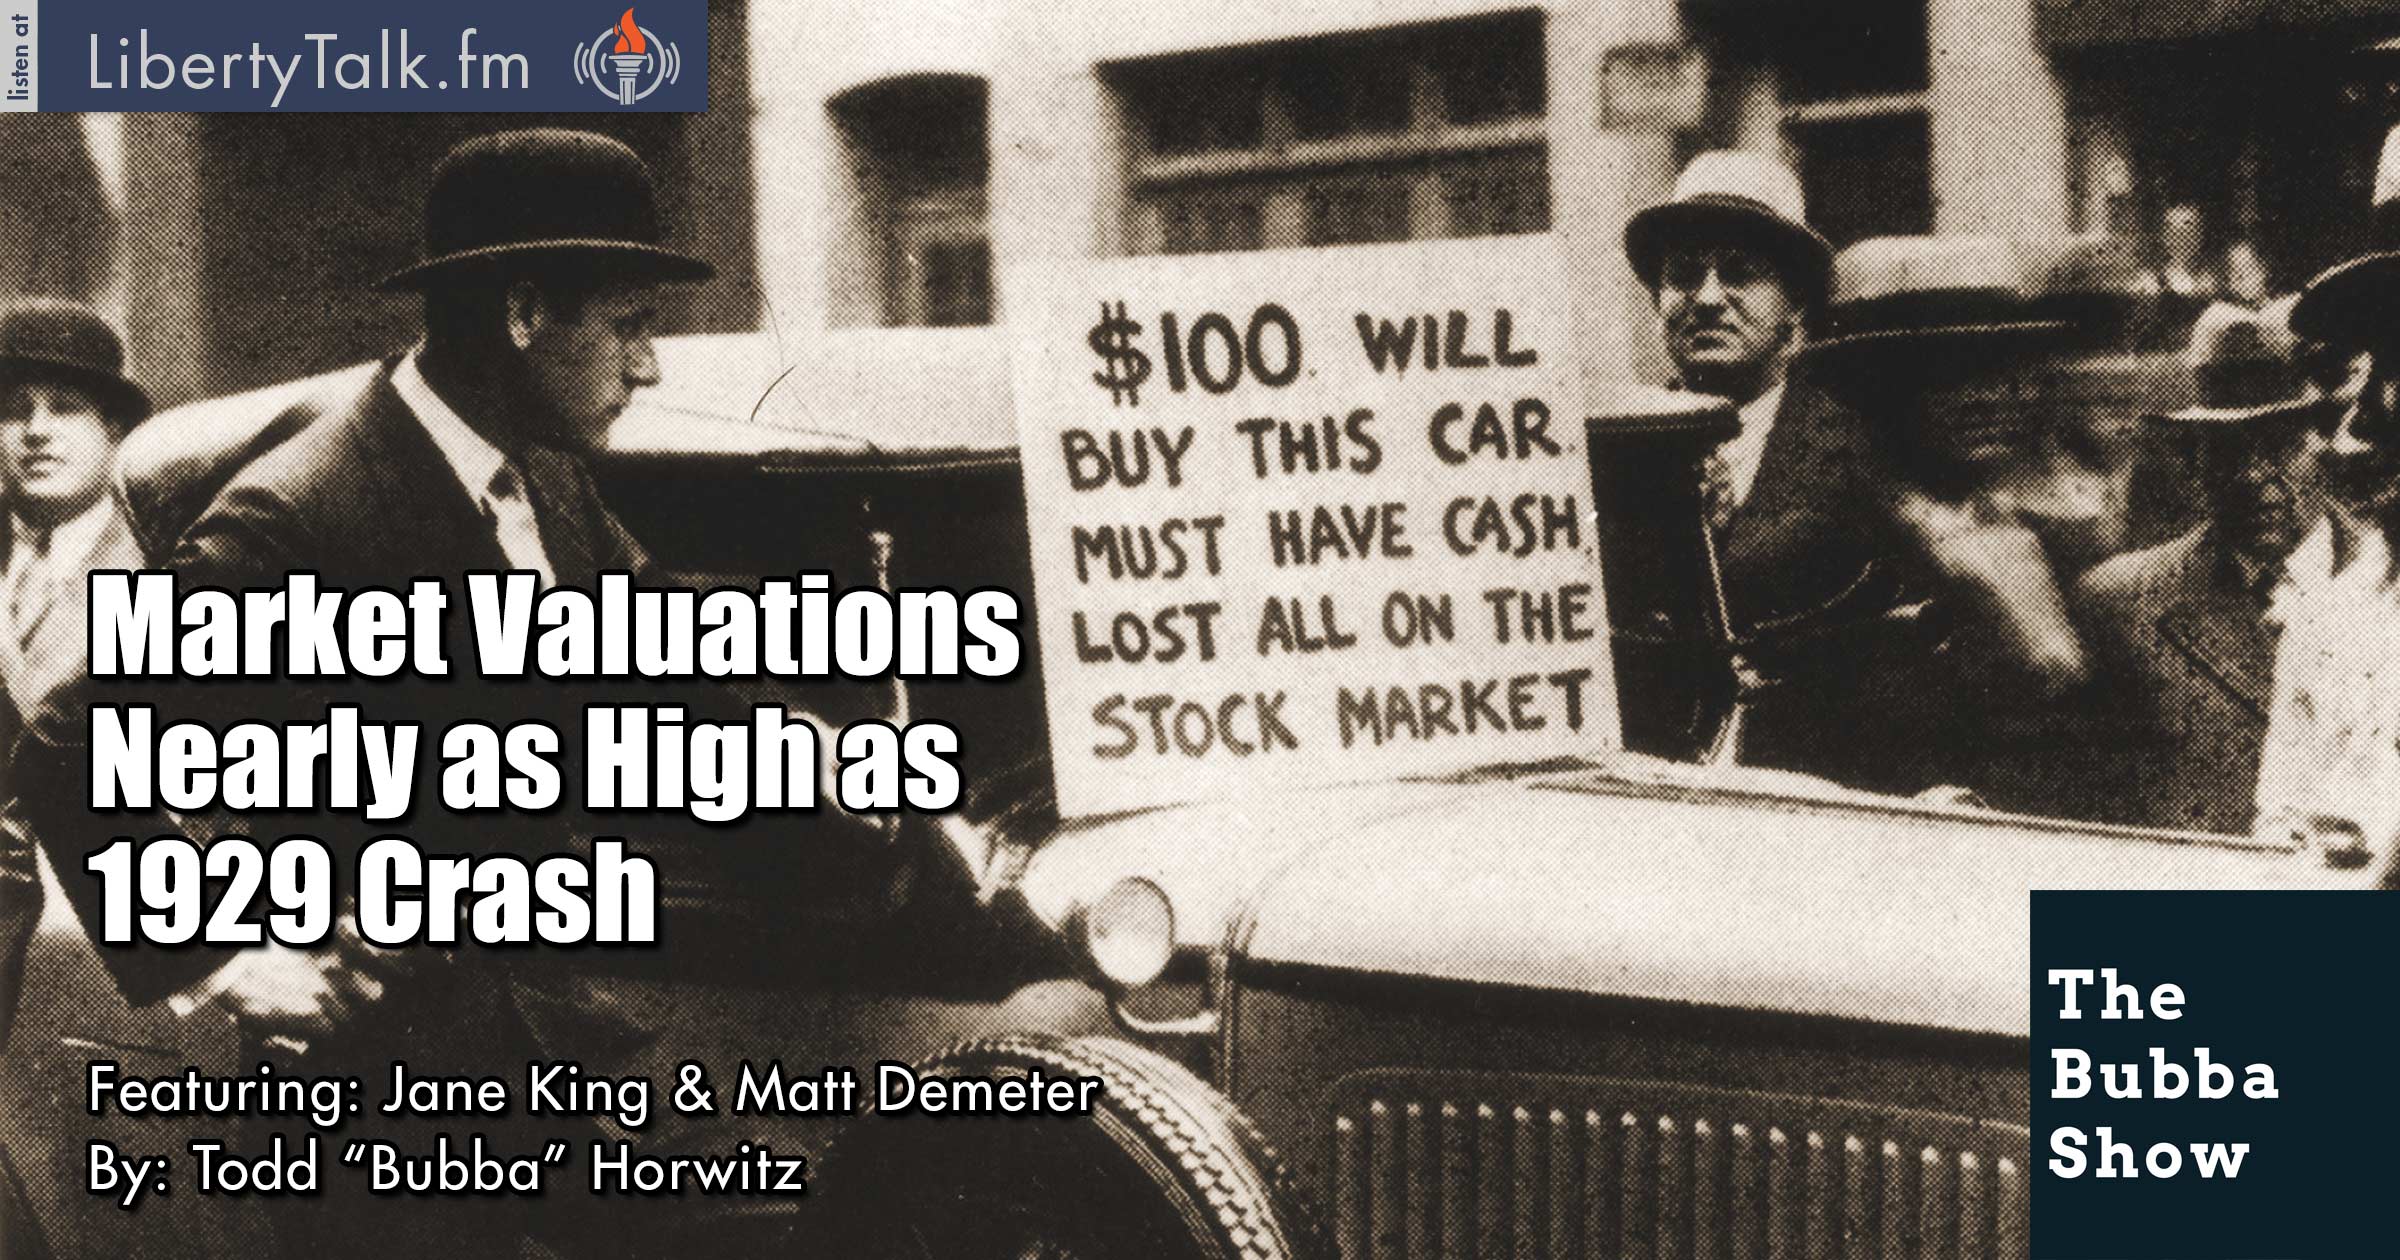 Market Valuations Nearly as High as 1929 Crash - The Bubba Show